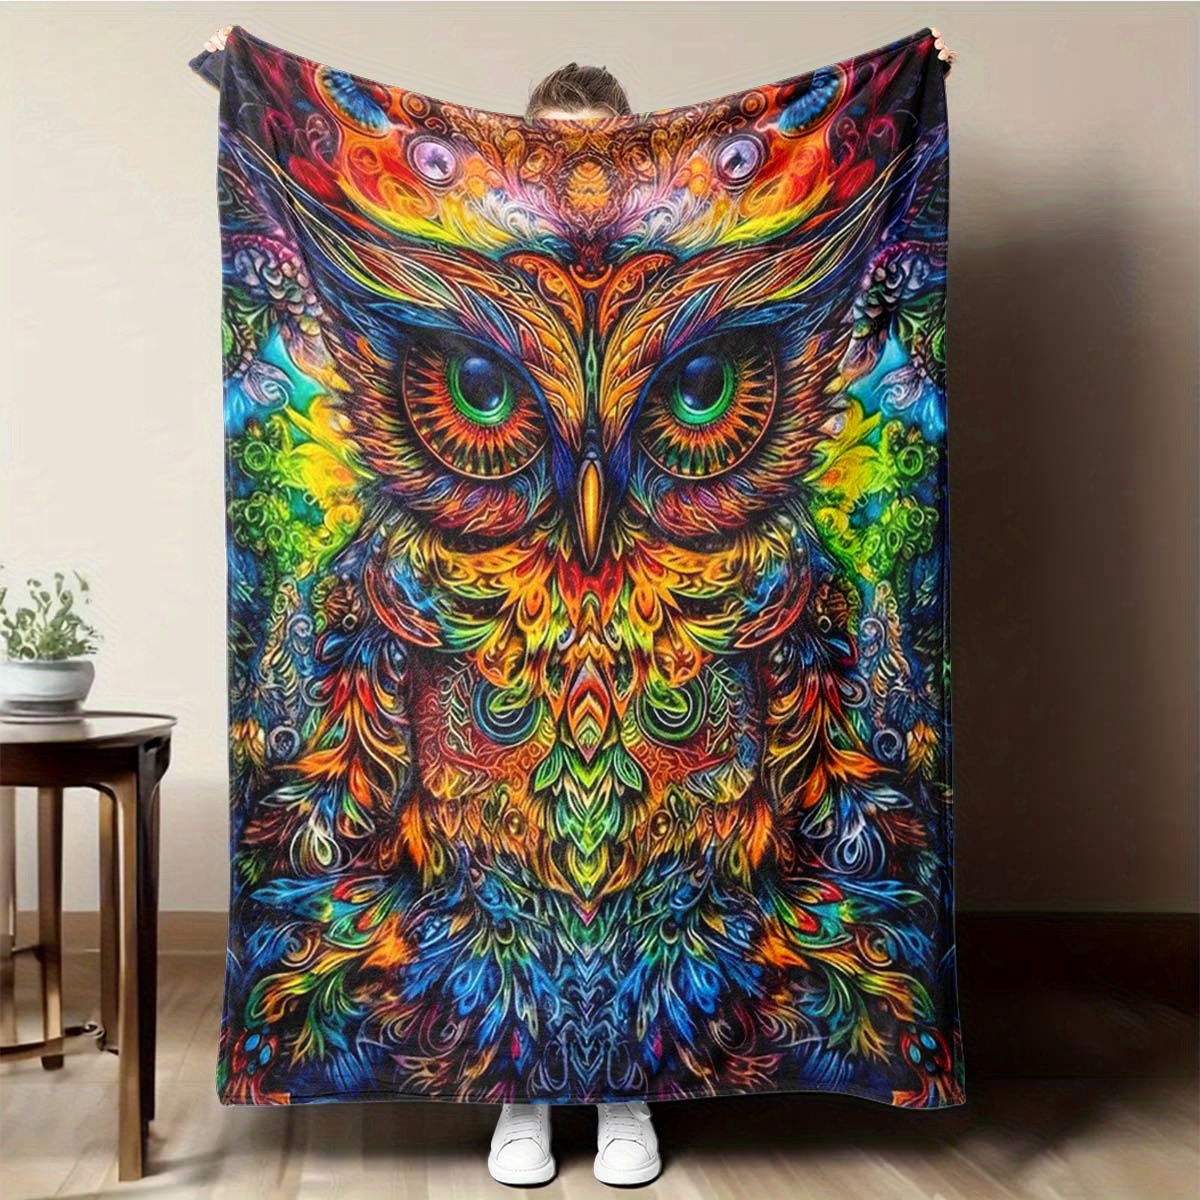 

Artistic Patterns Of Colorful Big-eyed Owls On Four-season Flannel Office Chairs Blankets